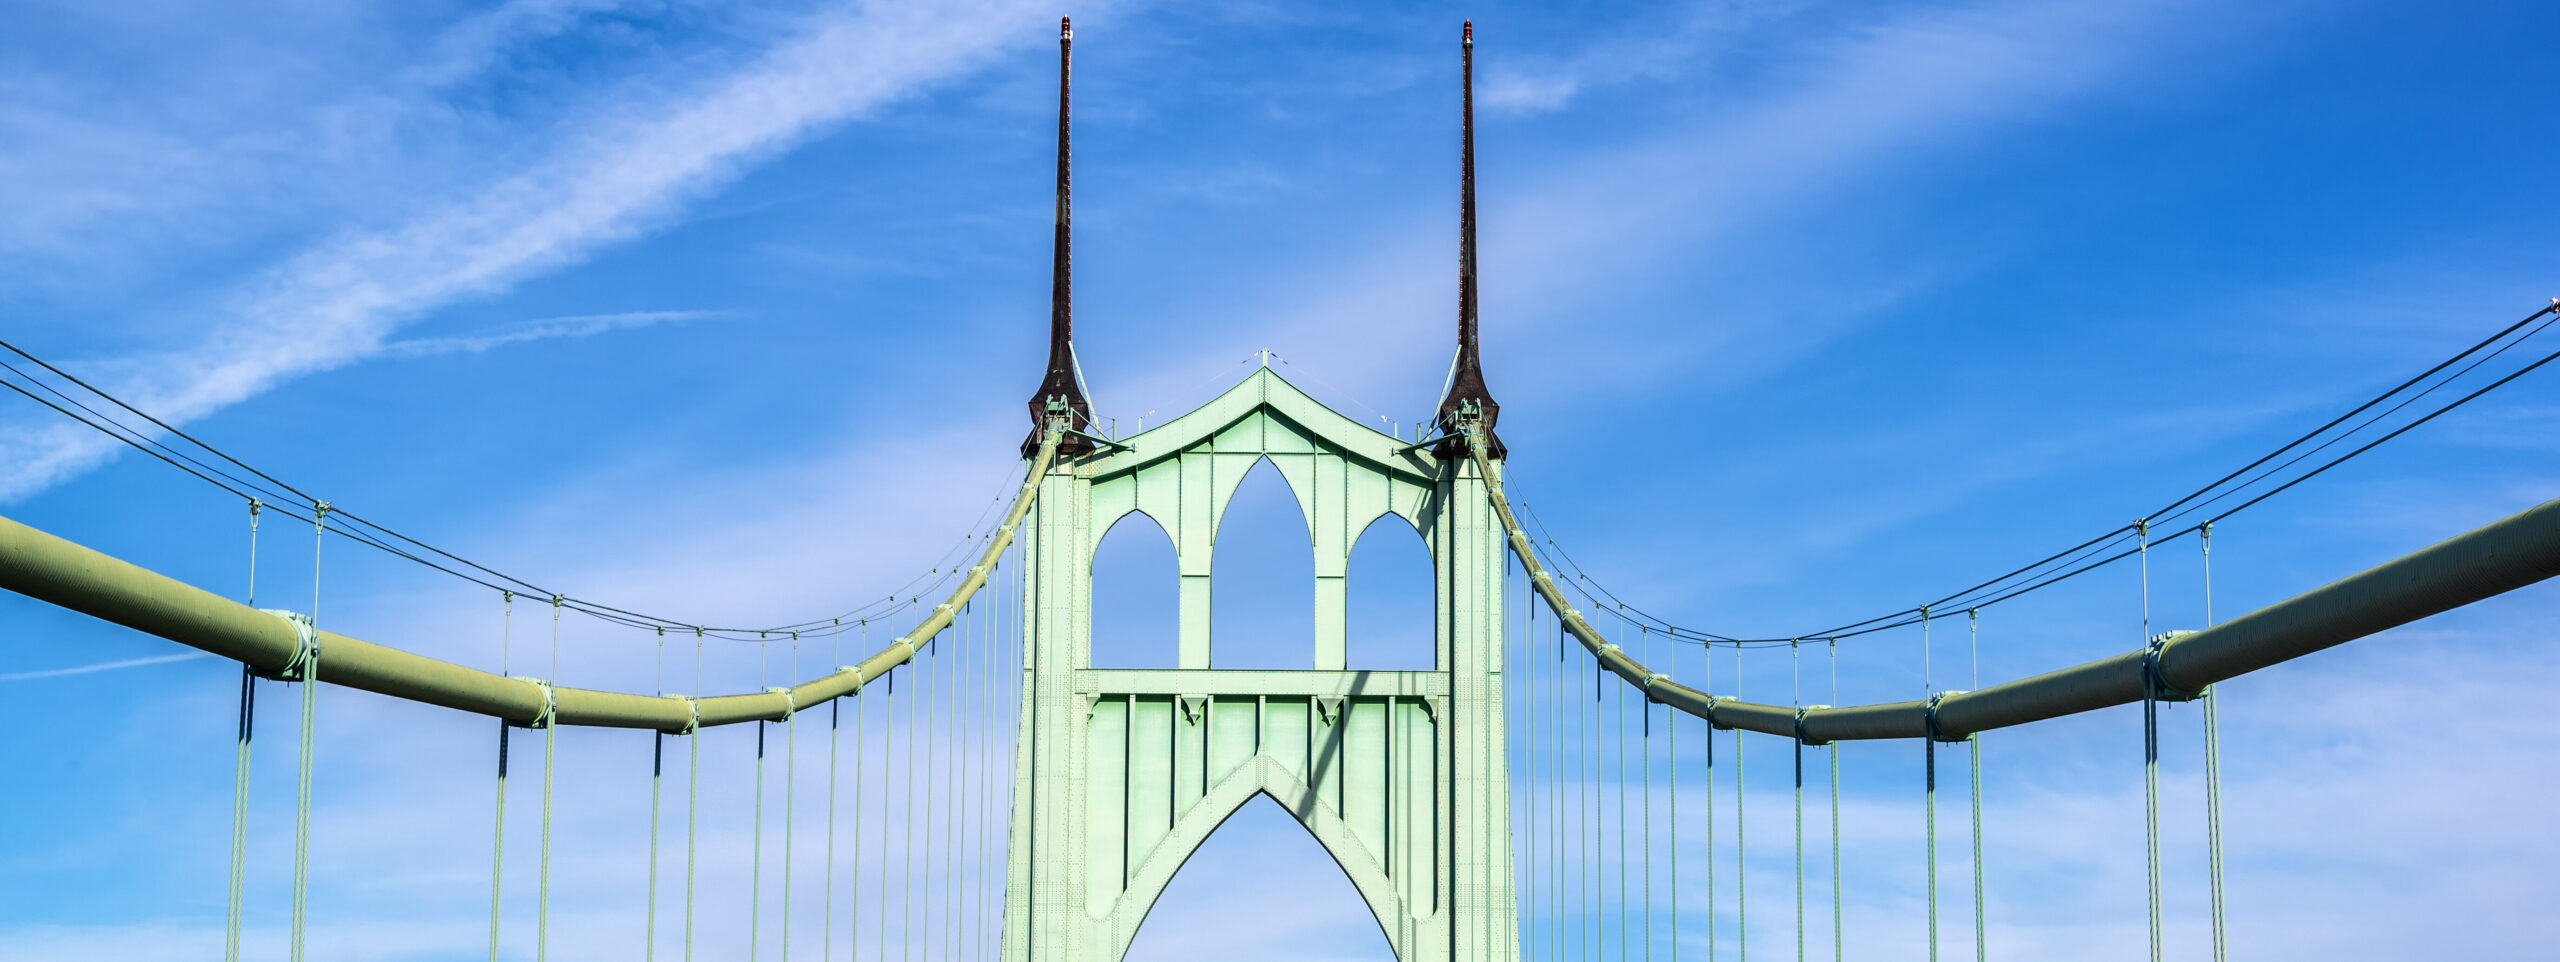 Top view of the St. Johns Bridge with a bright blue sky background